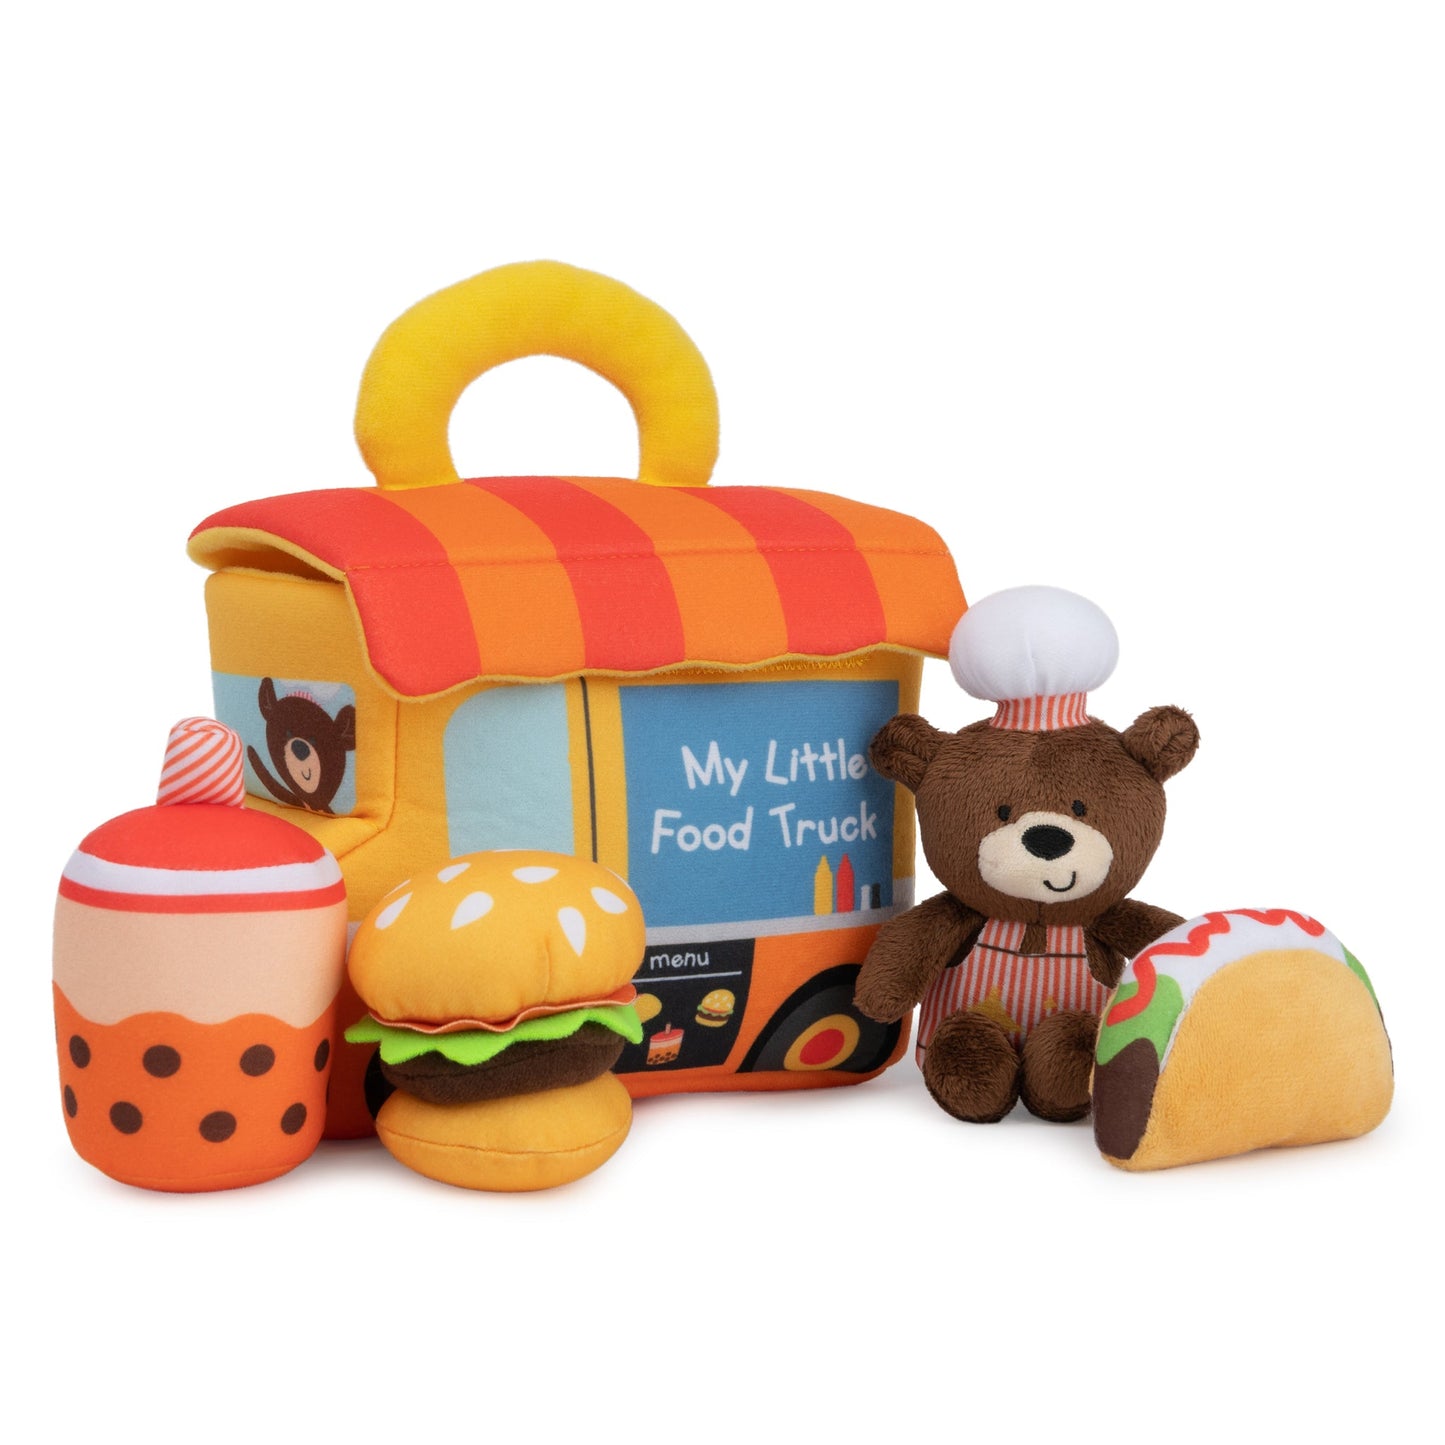 MY LITTLE FOOD TRUCK PLAYSET, 7.5 IN